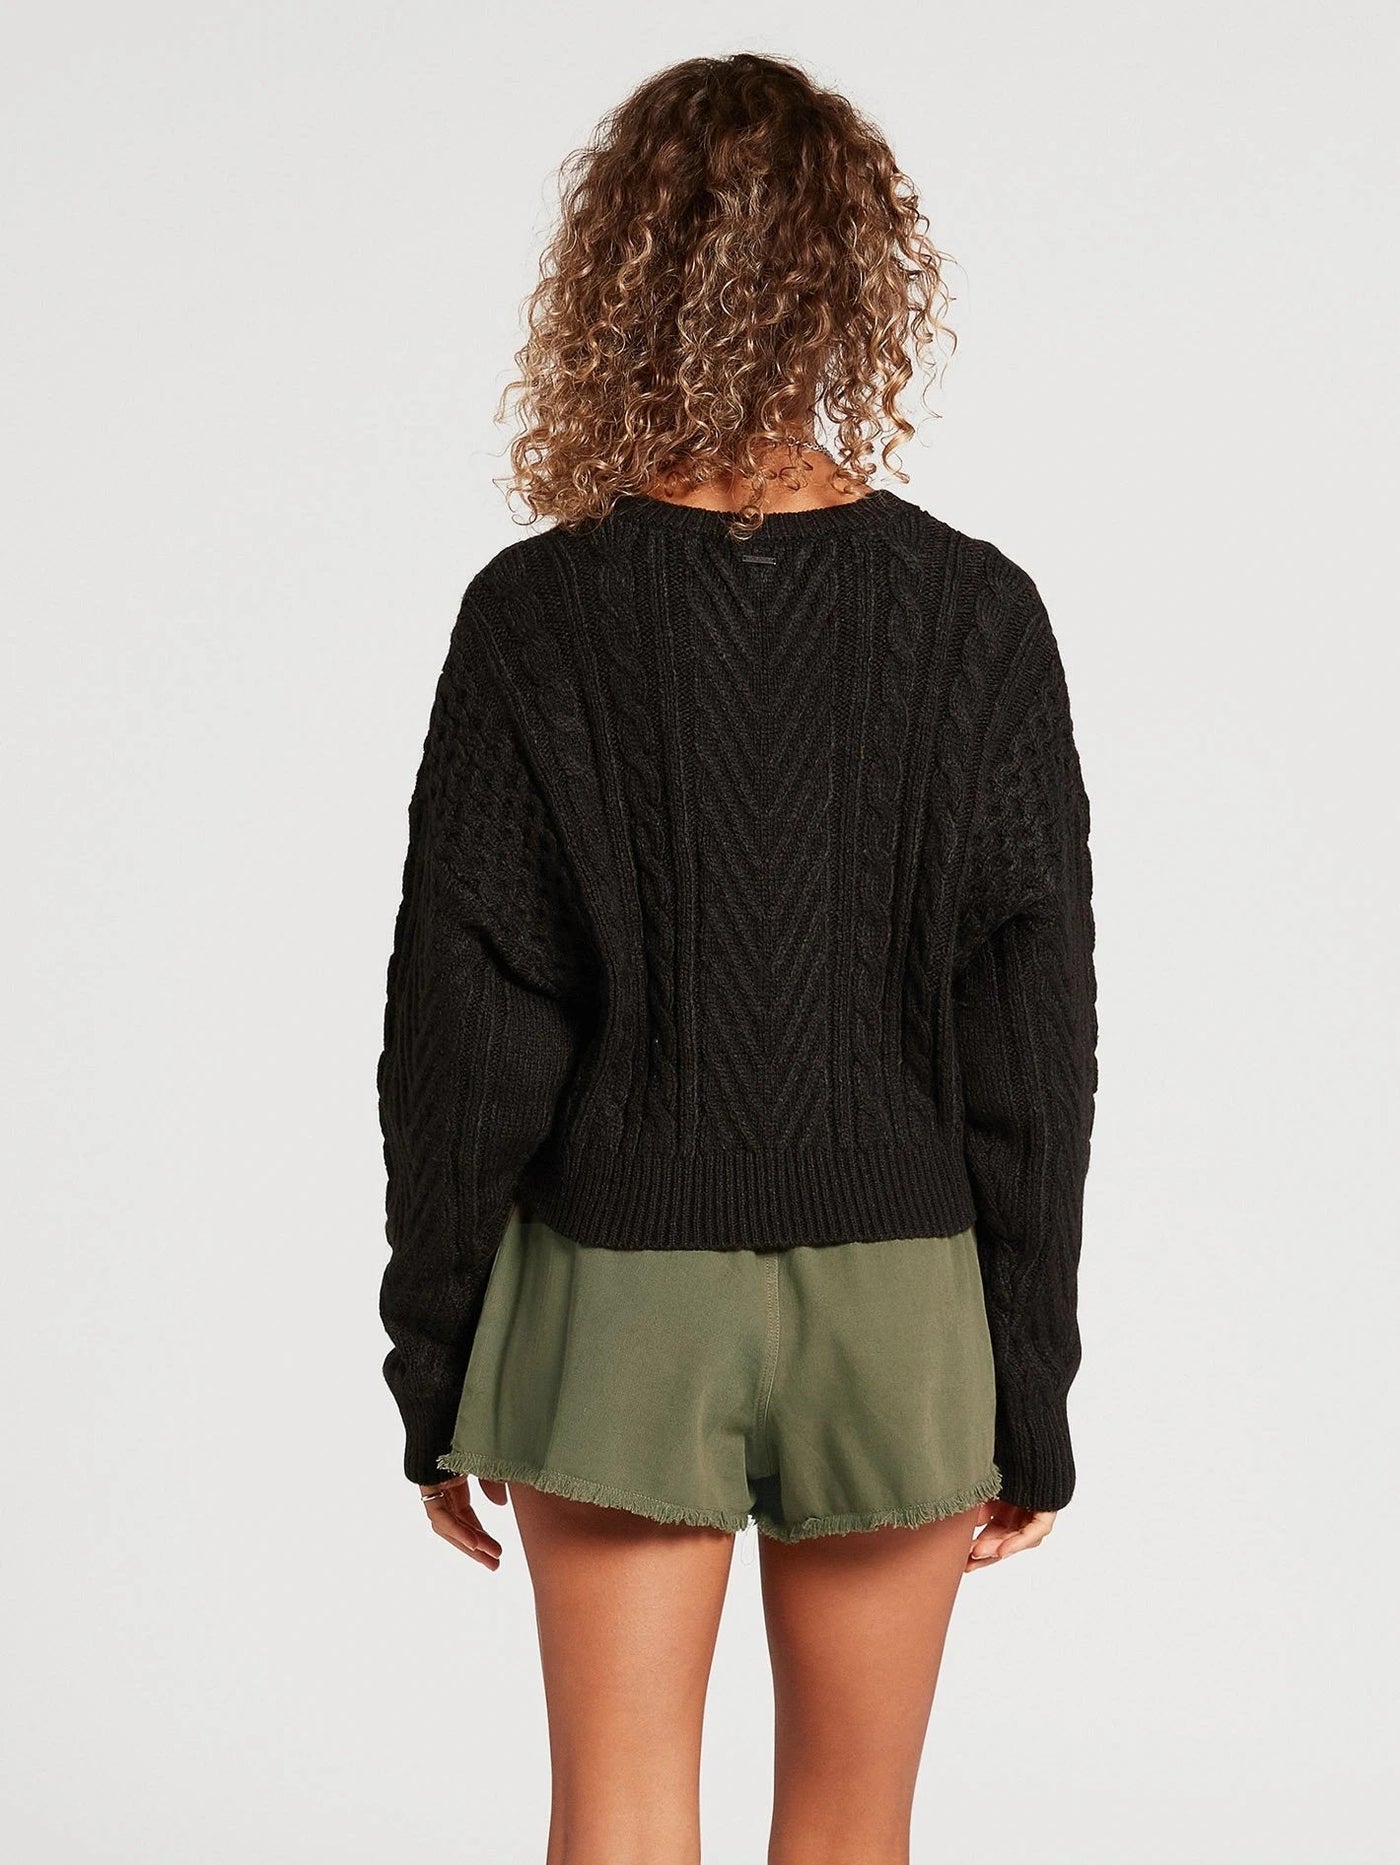 Volcom Cabled Babe Sweater - black